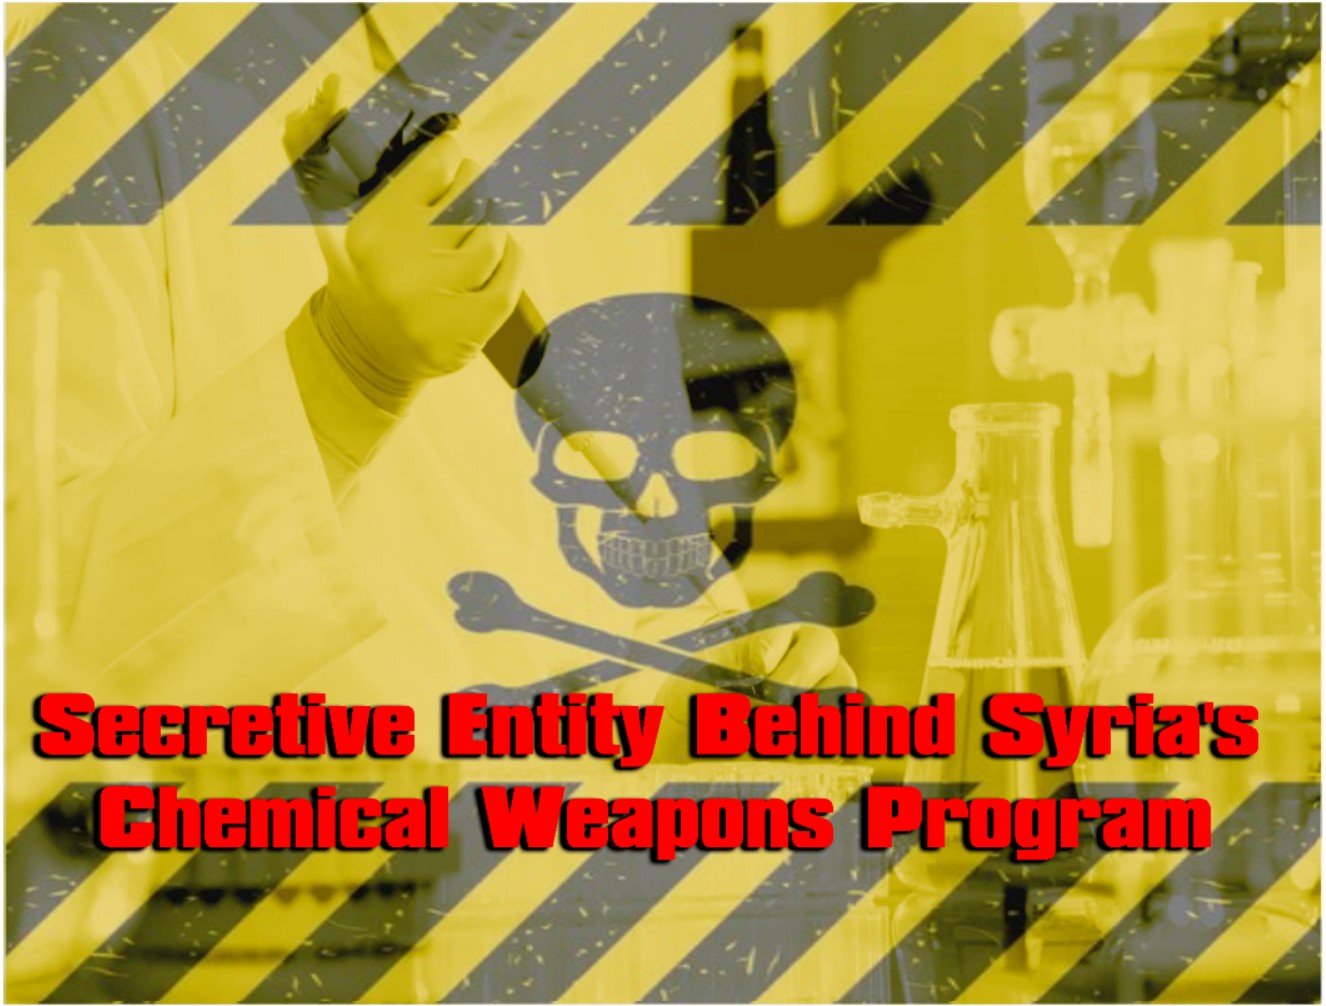 Read more about the article Secretive Entity Behind Syria’s Chemical Weapons Program